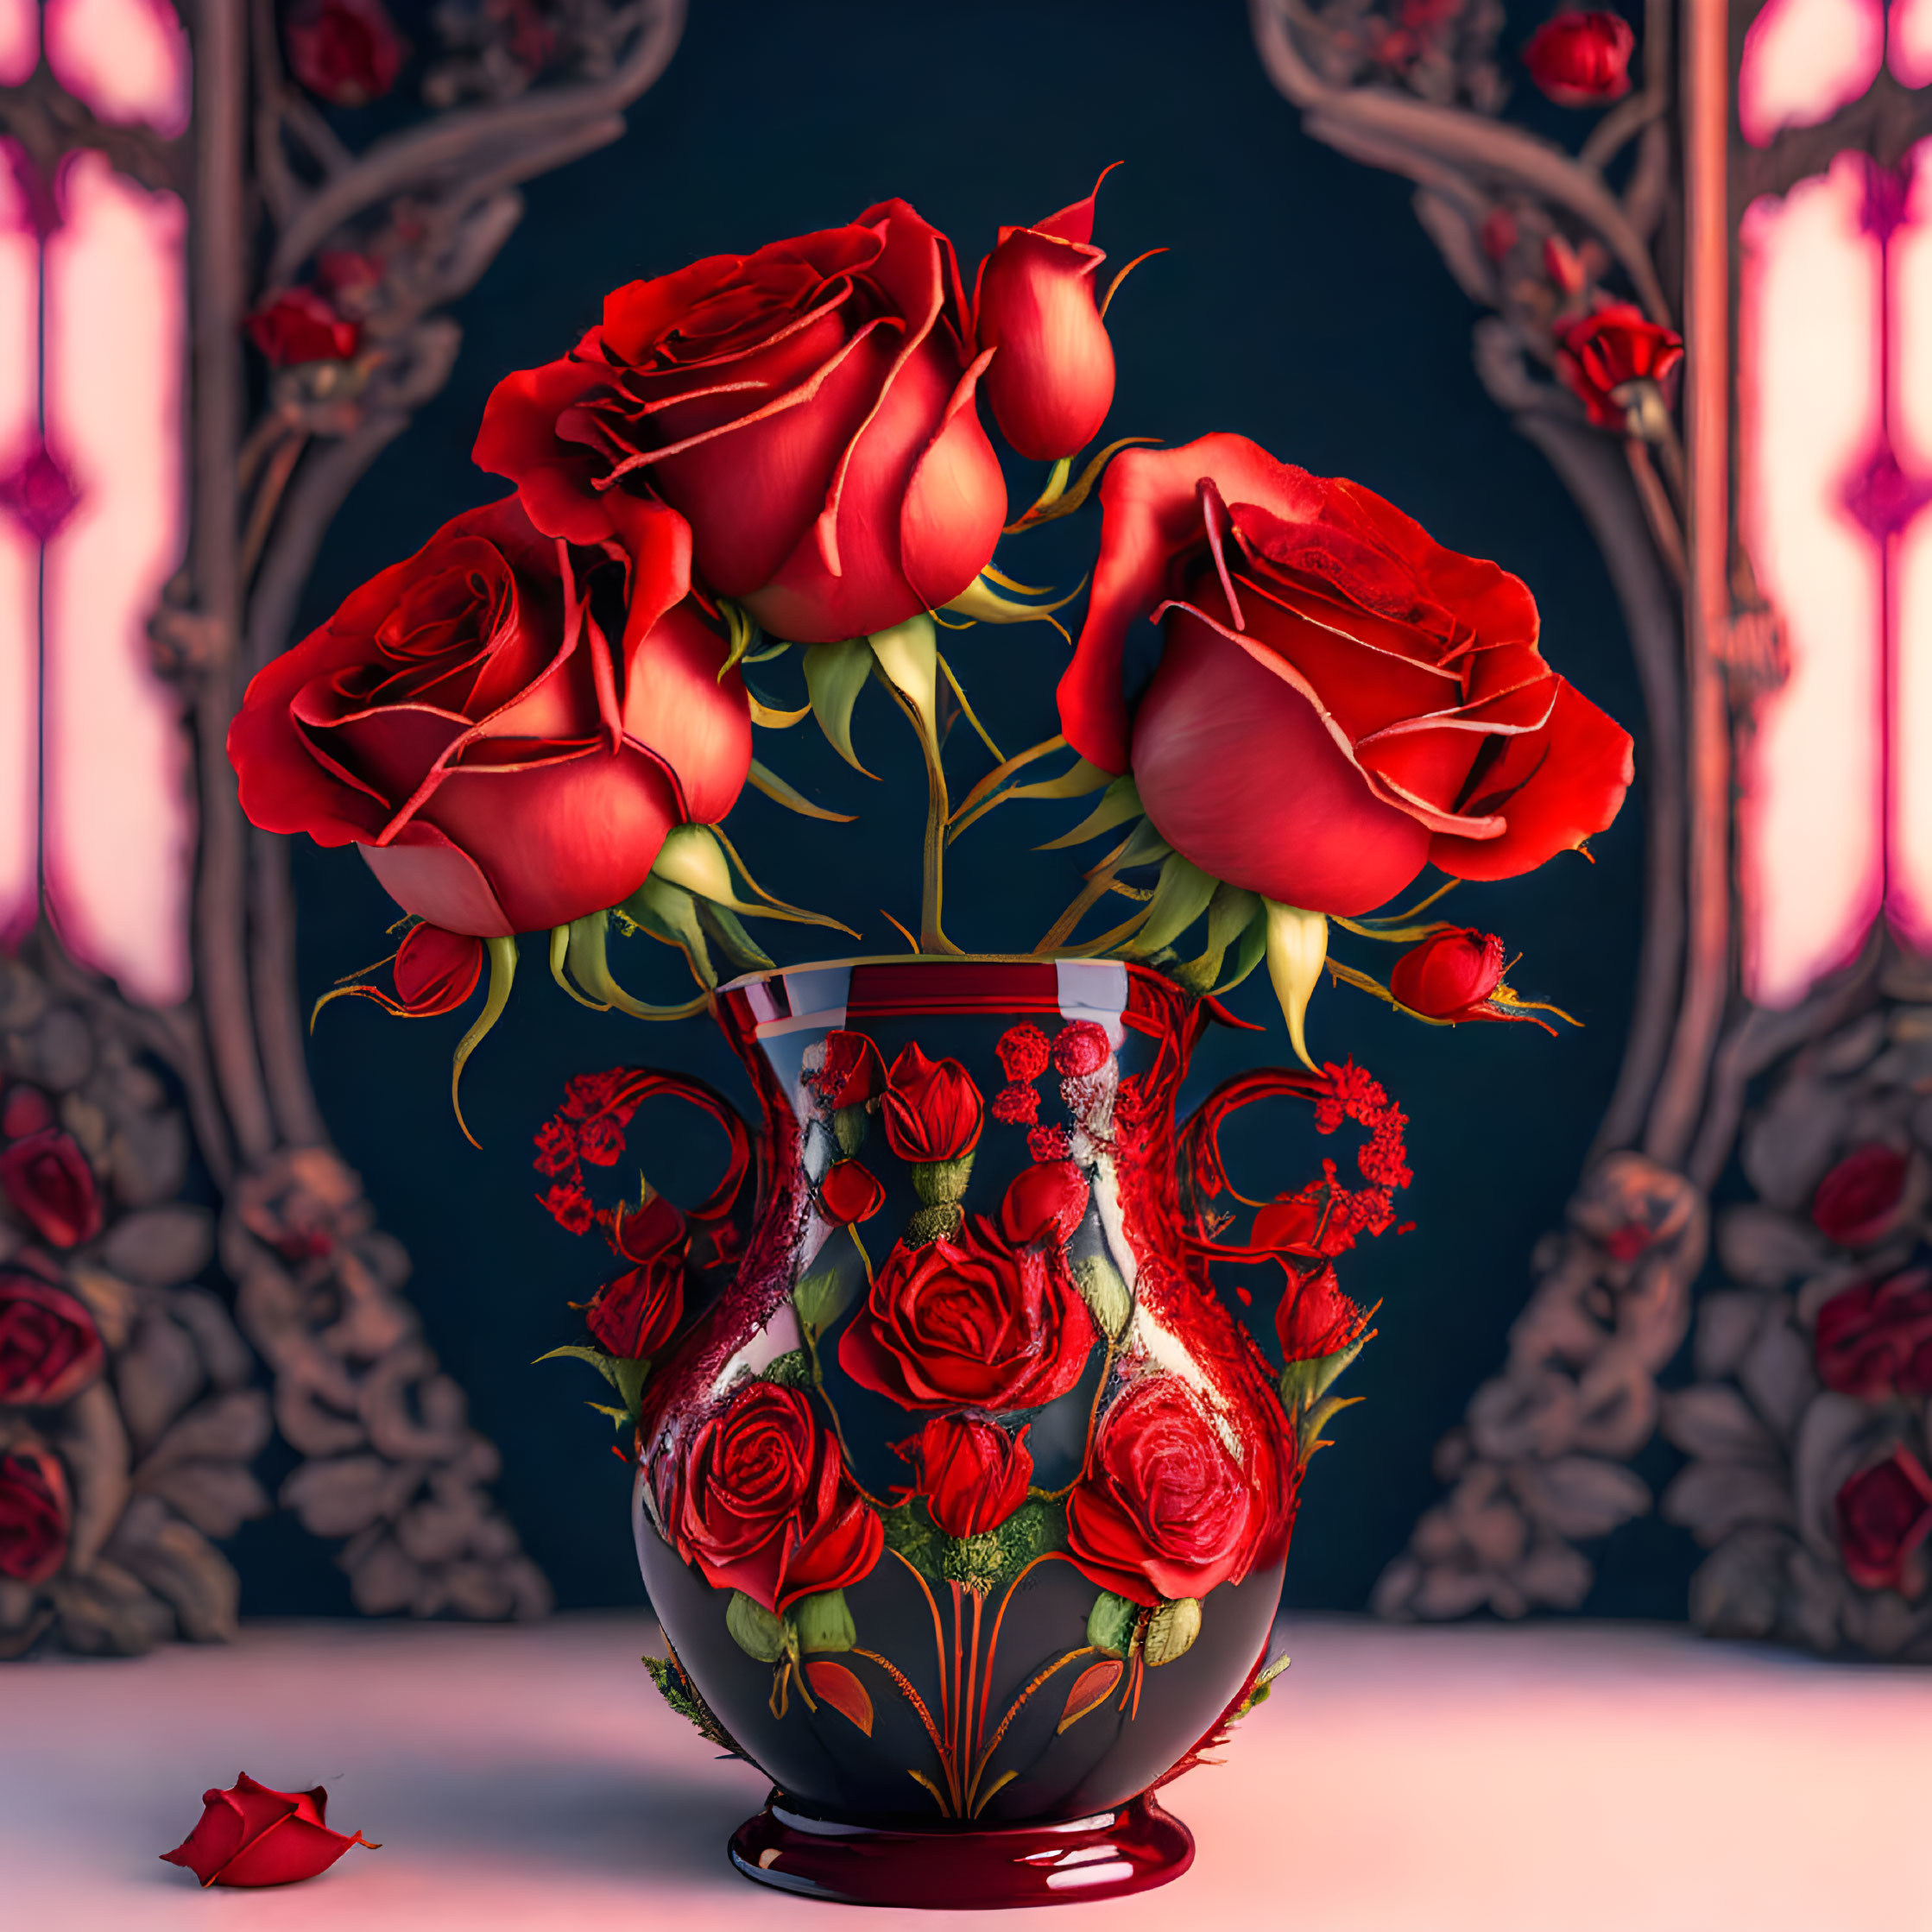 Red Roses Bouquet in Ornate Vase with Floral Backdrop